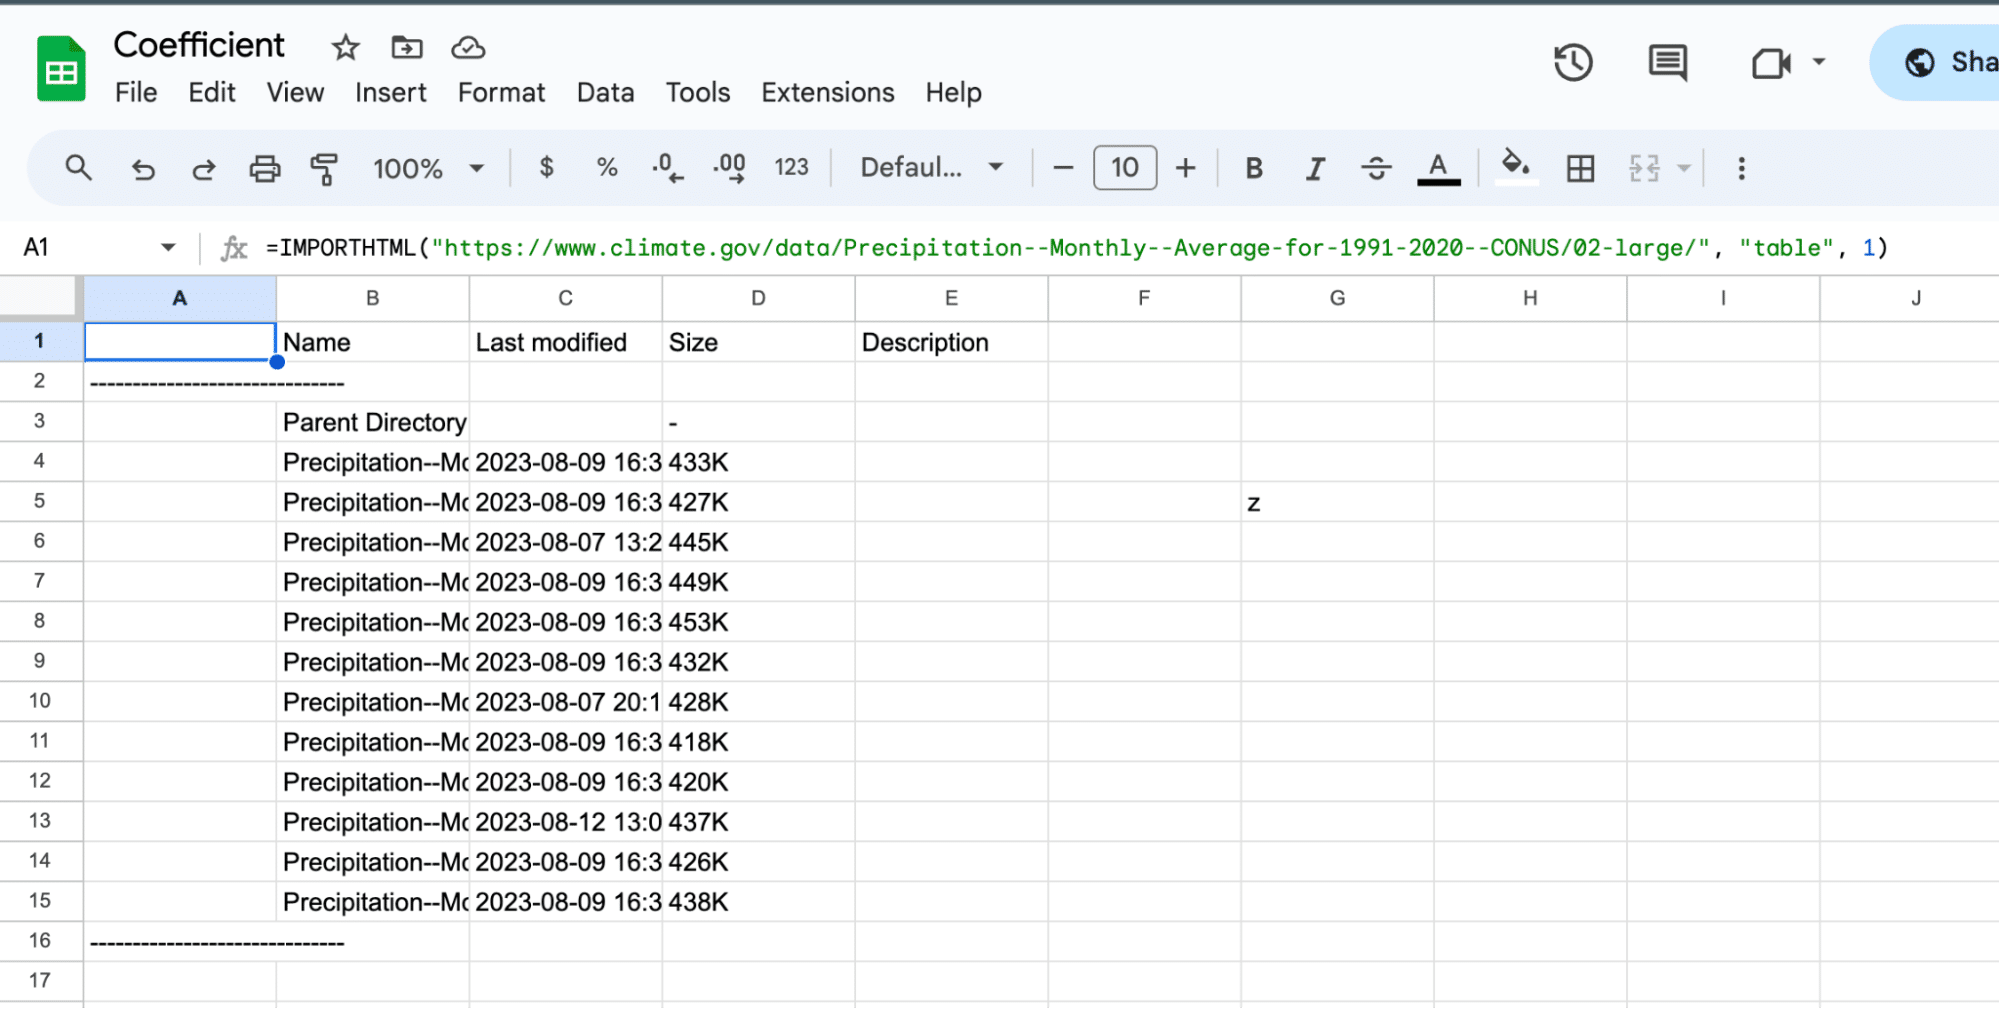 Executing the IMPORTHTML function to display imported data in Google Sheets.